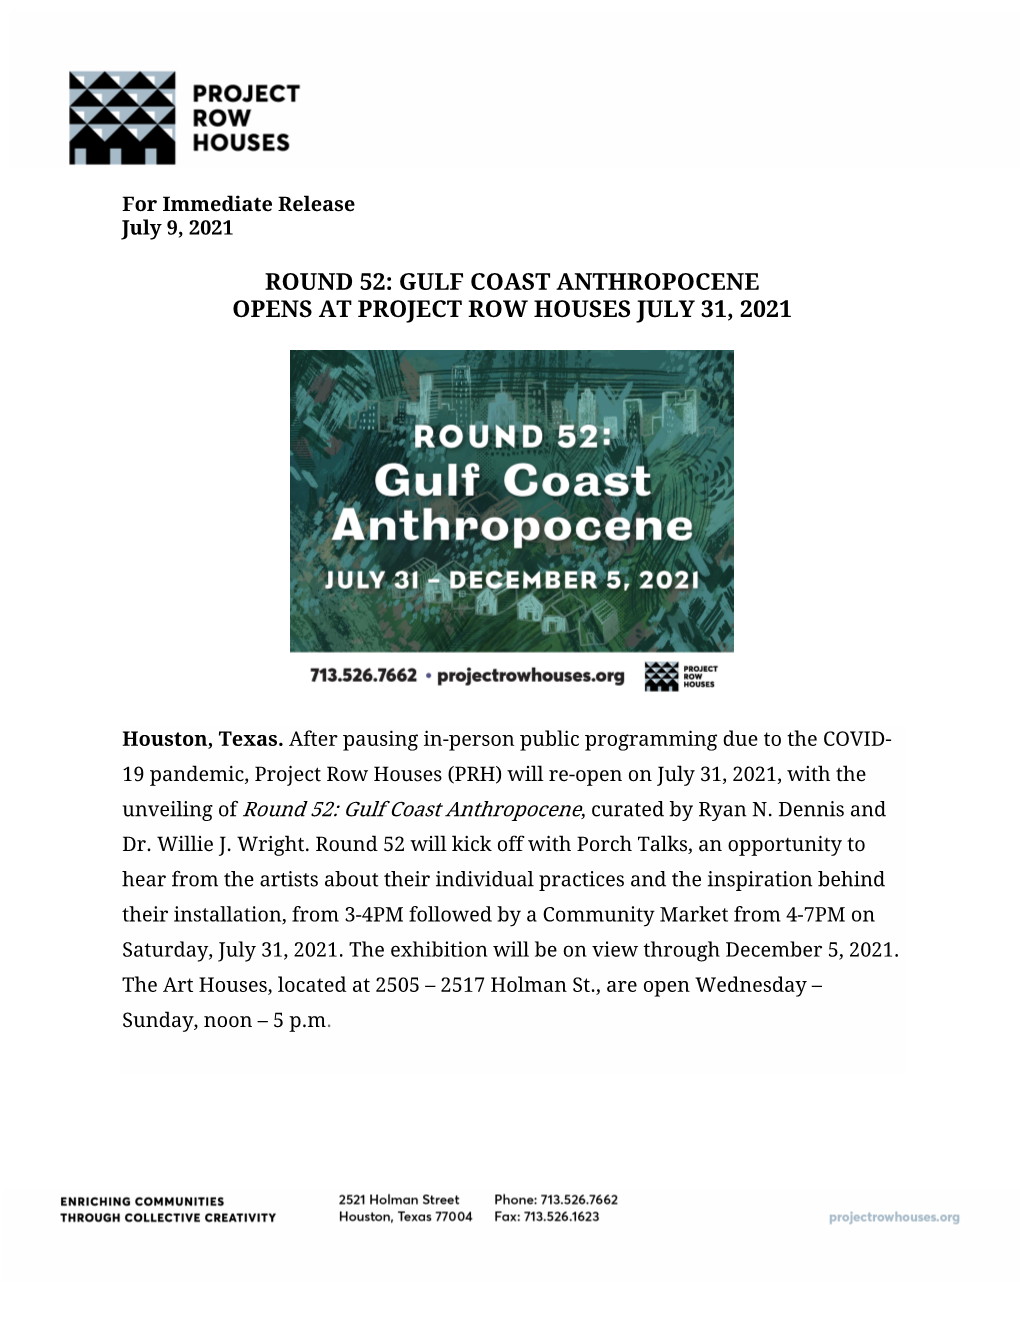 Round 52: Gulf Coast Anthropocene Opens at Project Row Houses July 31, 2021